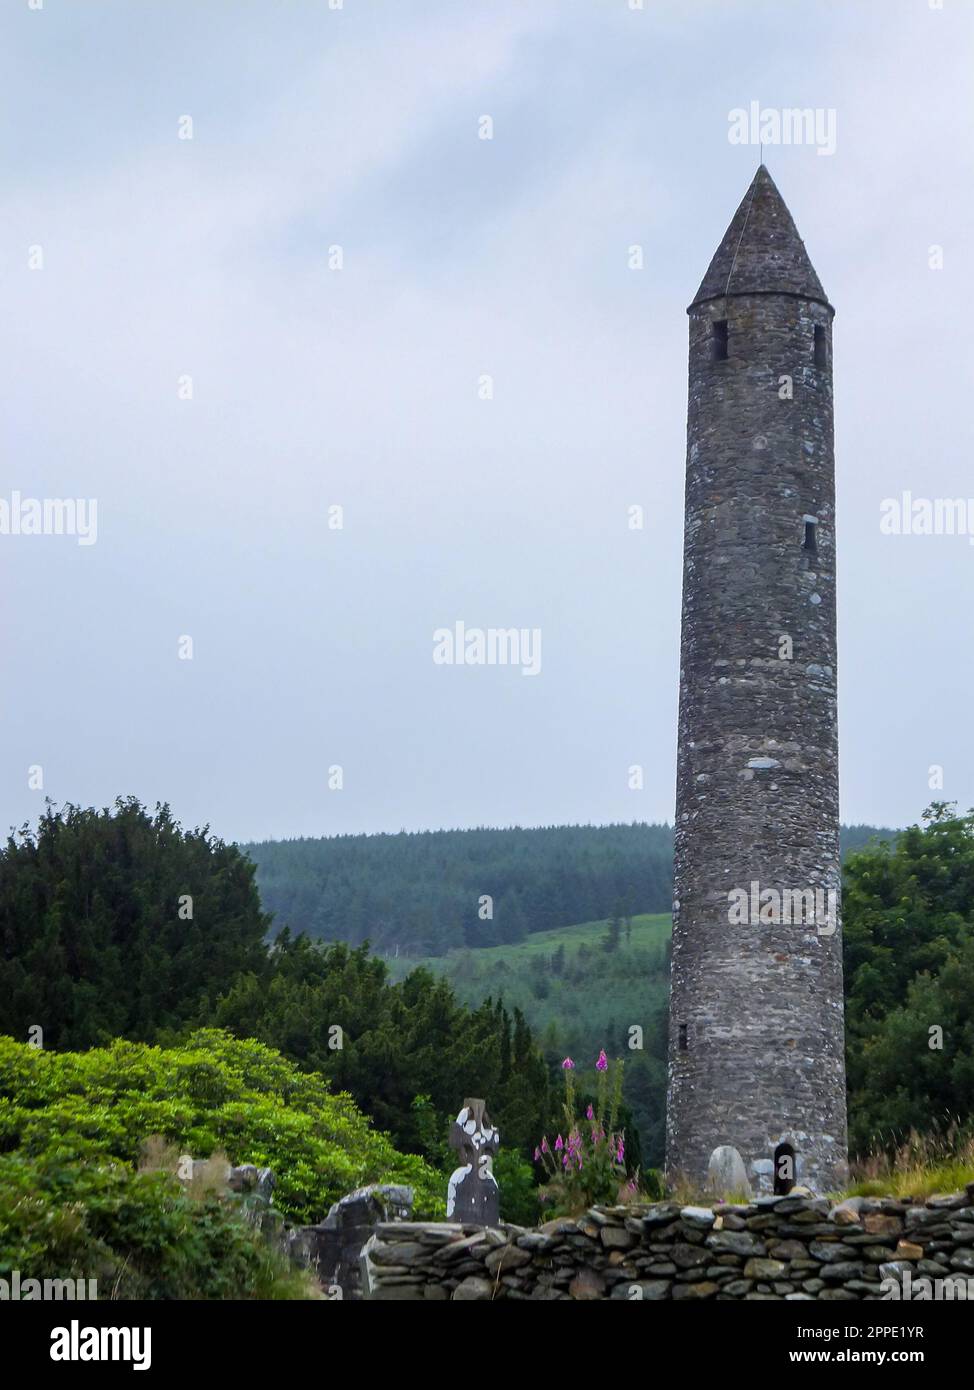 The ancient Round Tower of Saint Kevin's Monastery at Glendalough Monastic City in Wicklow Mountains National Park, Ireland. Stock Photo